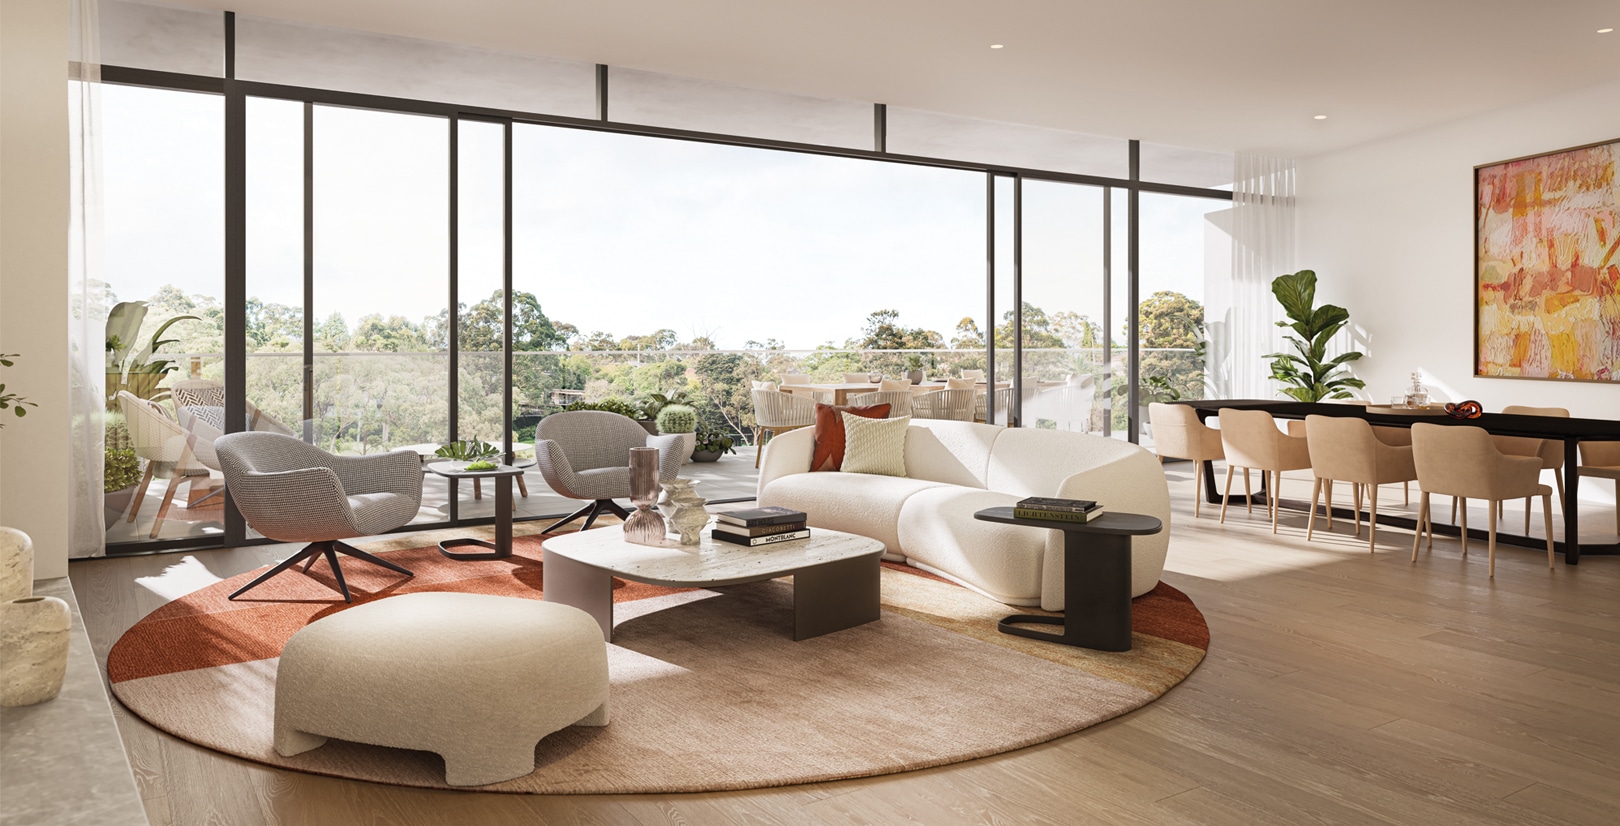 Watermark Chatswood Penthouse apartment living room